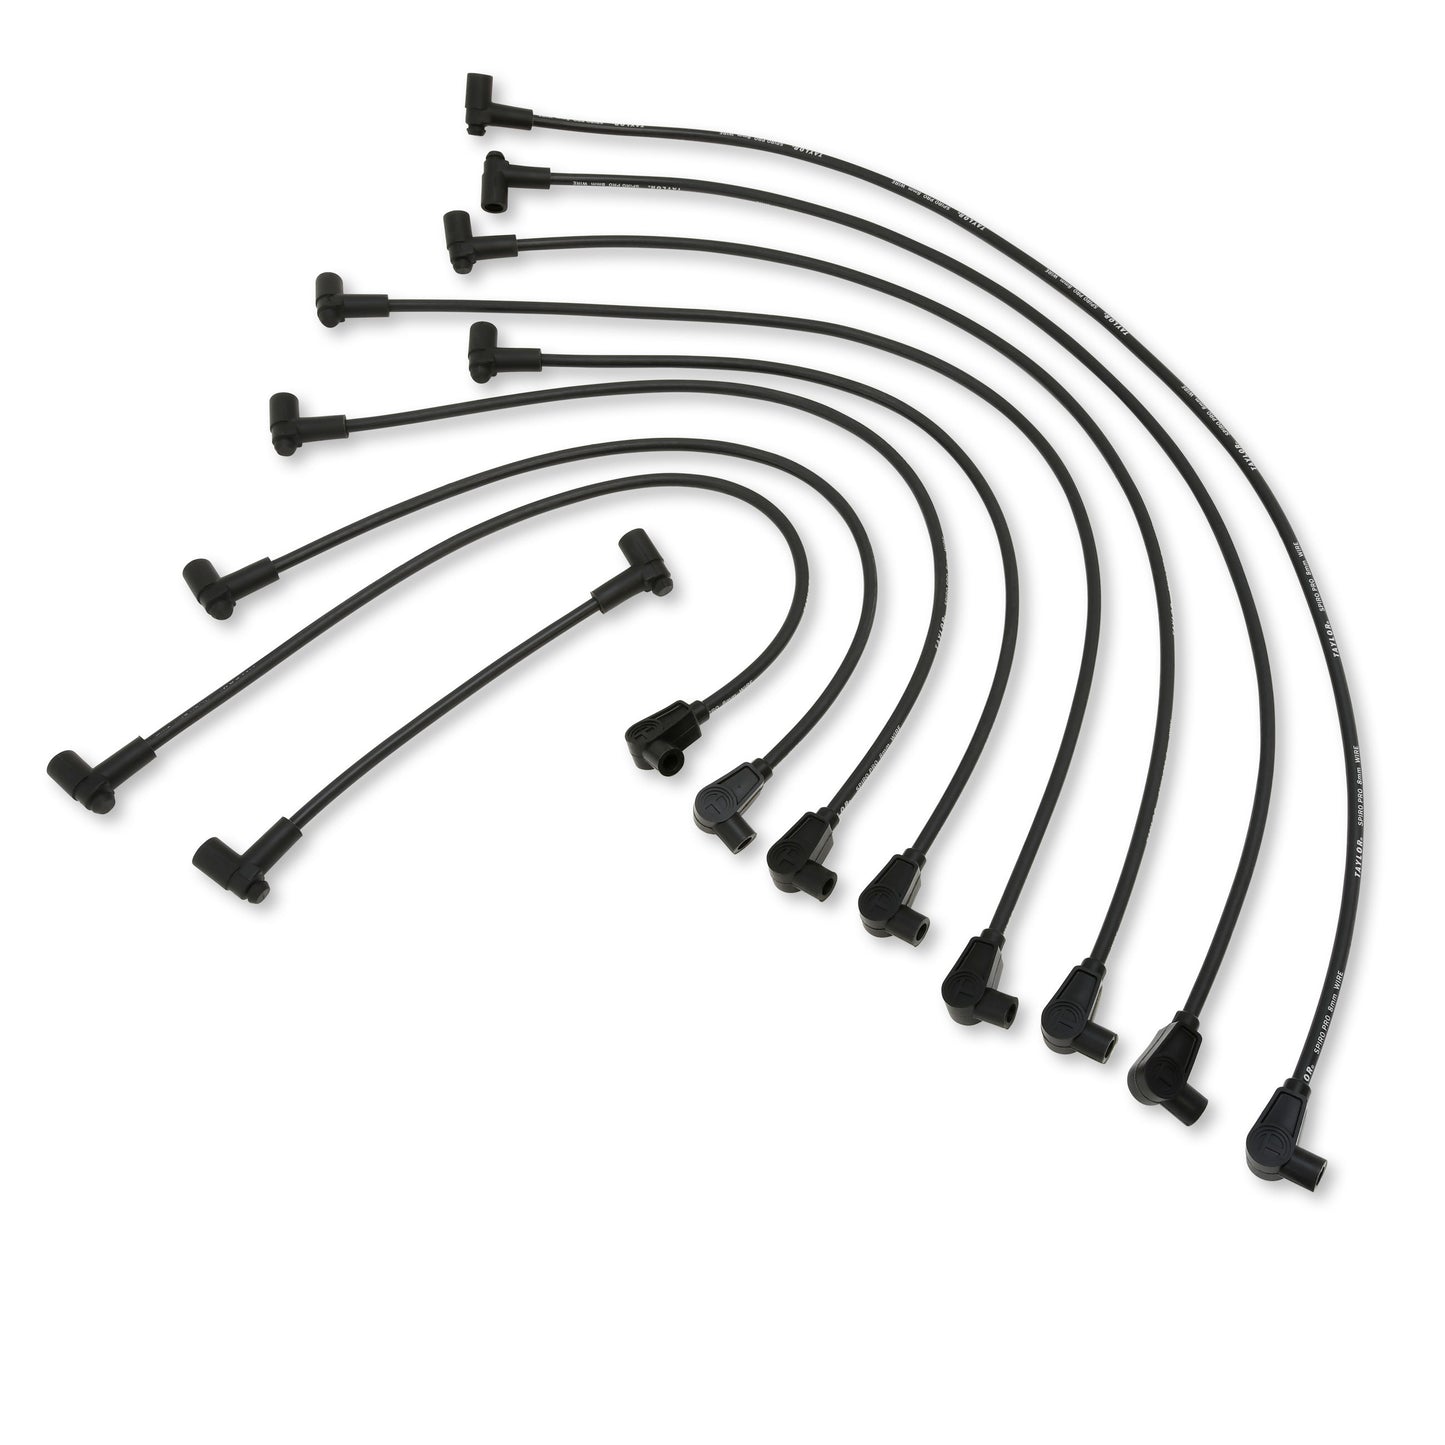 Taylor Cable 74005 8mm Spiro-Pro Custom Spark Plug Wires 8 cyl black